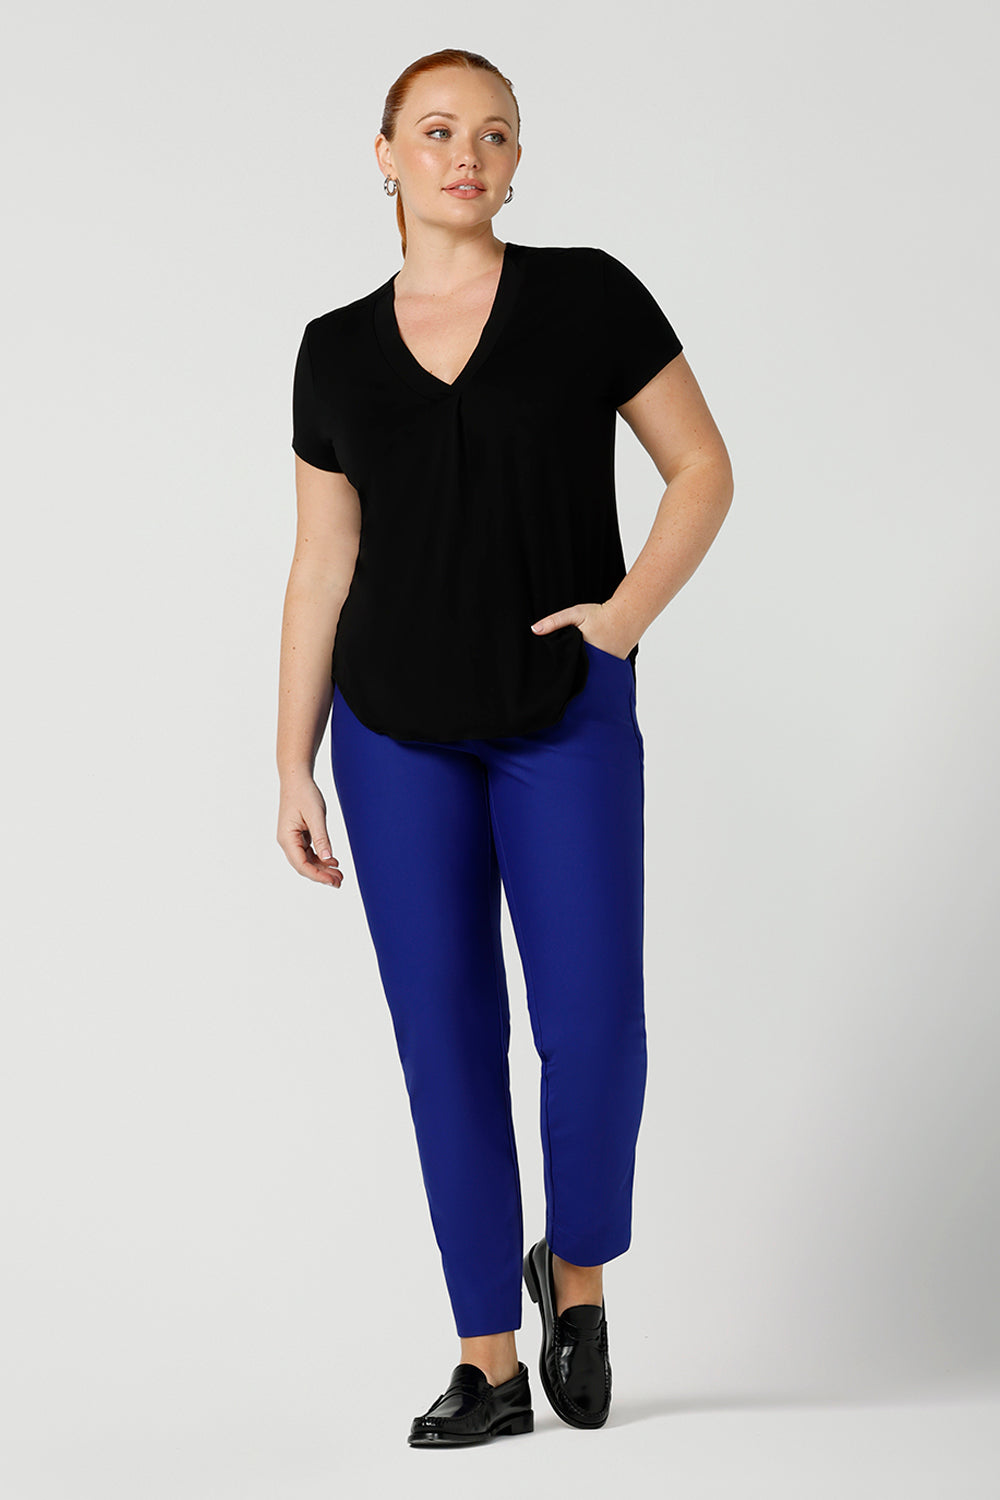 Lulu Tailored Pant in Navy, Leina and Fleur